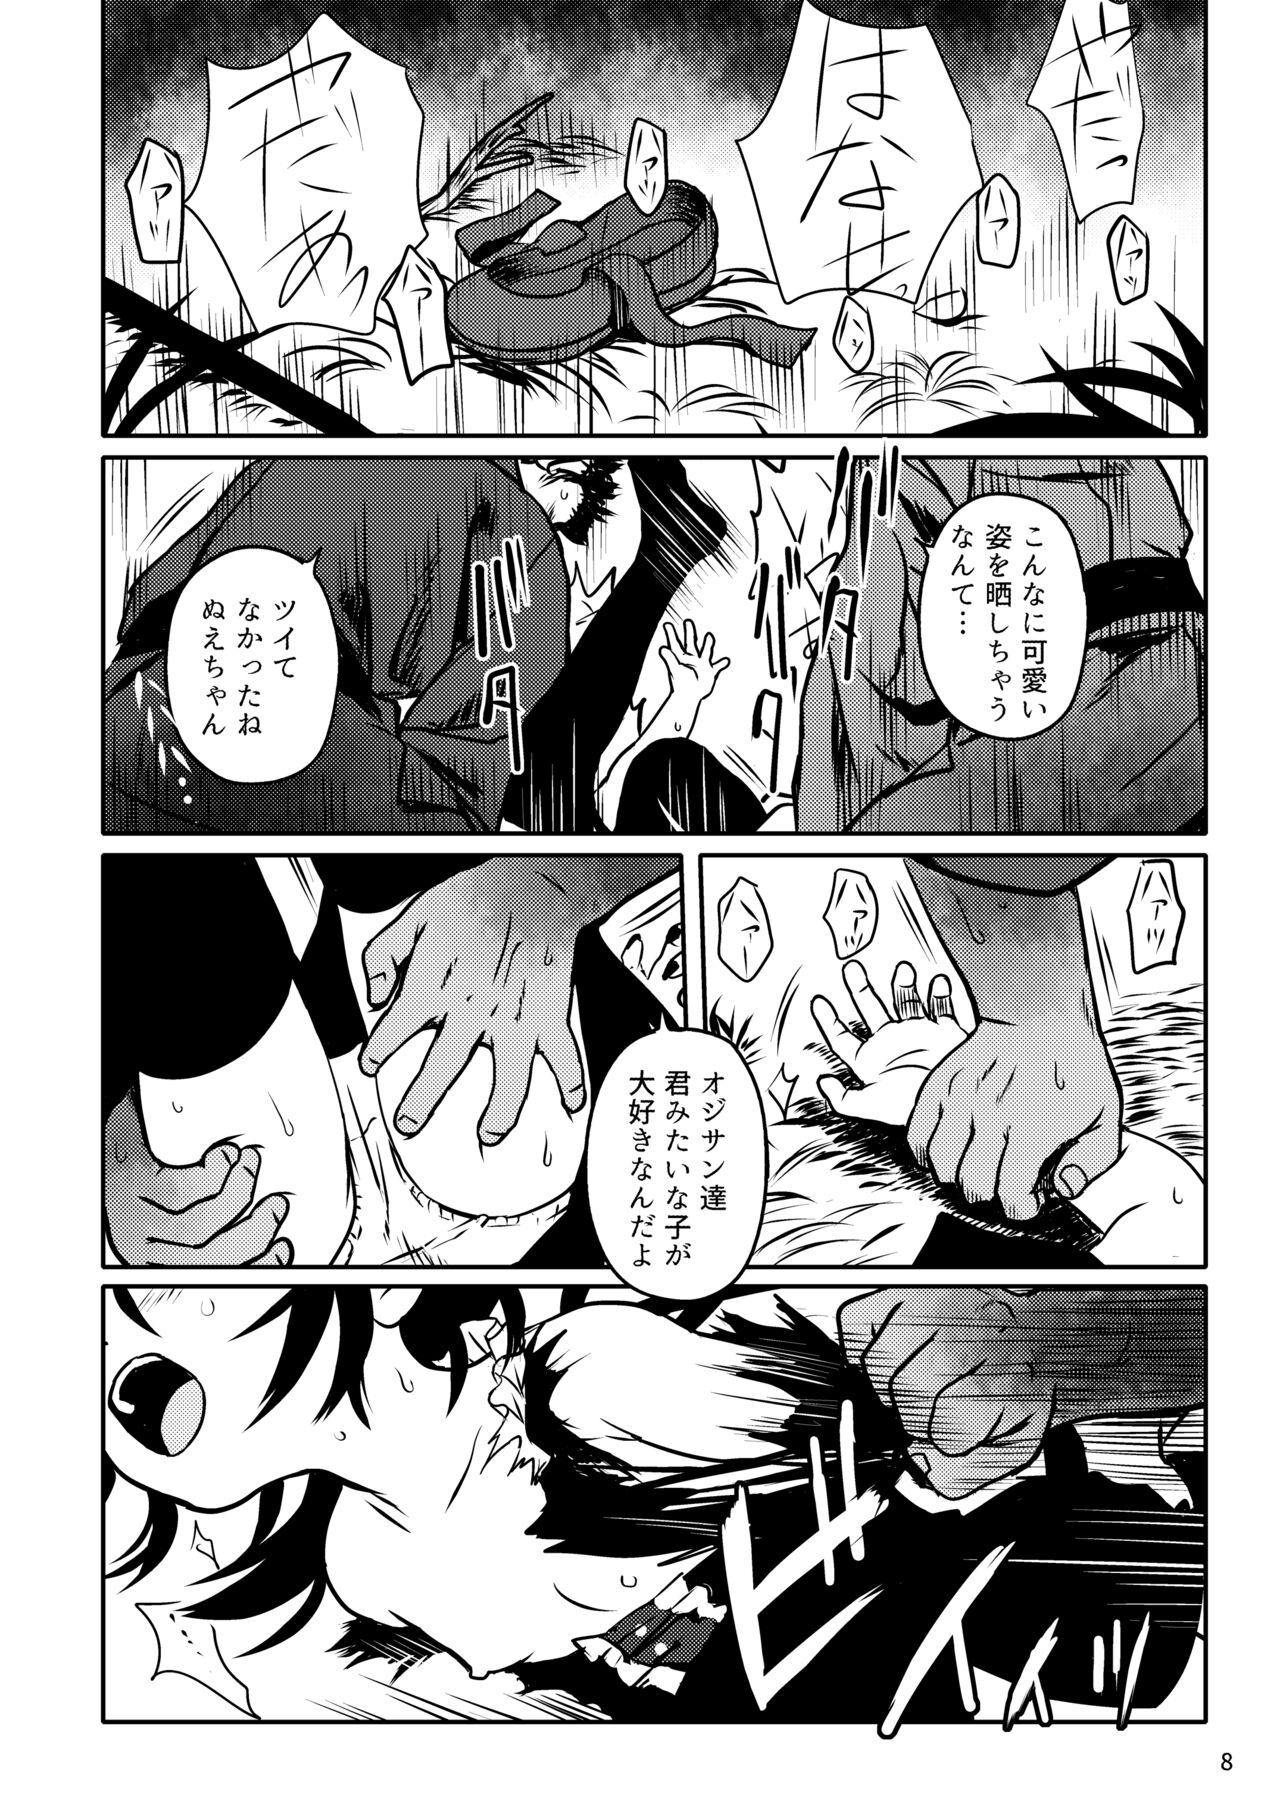 Best Blowjobs Ever Trauma! Nue-chan! - Touhou project Glamcore - Page 8